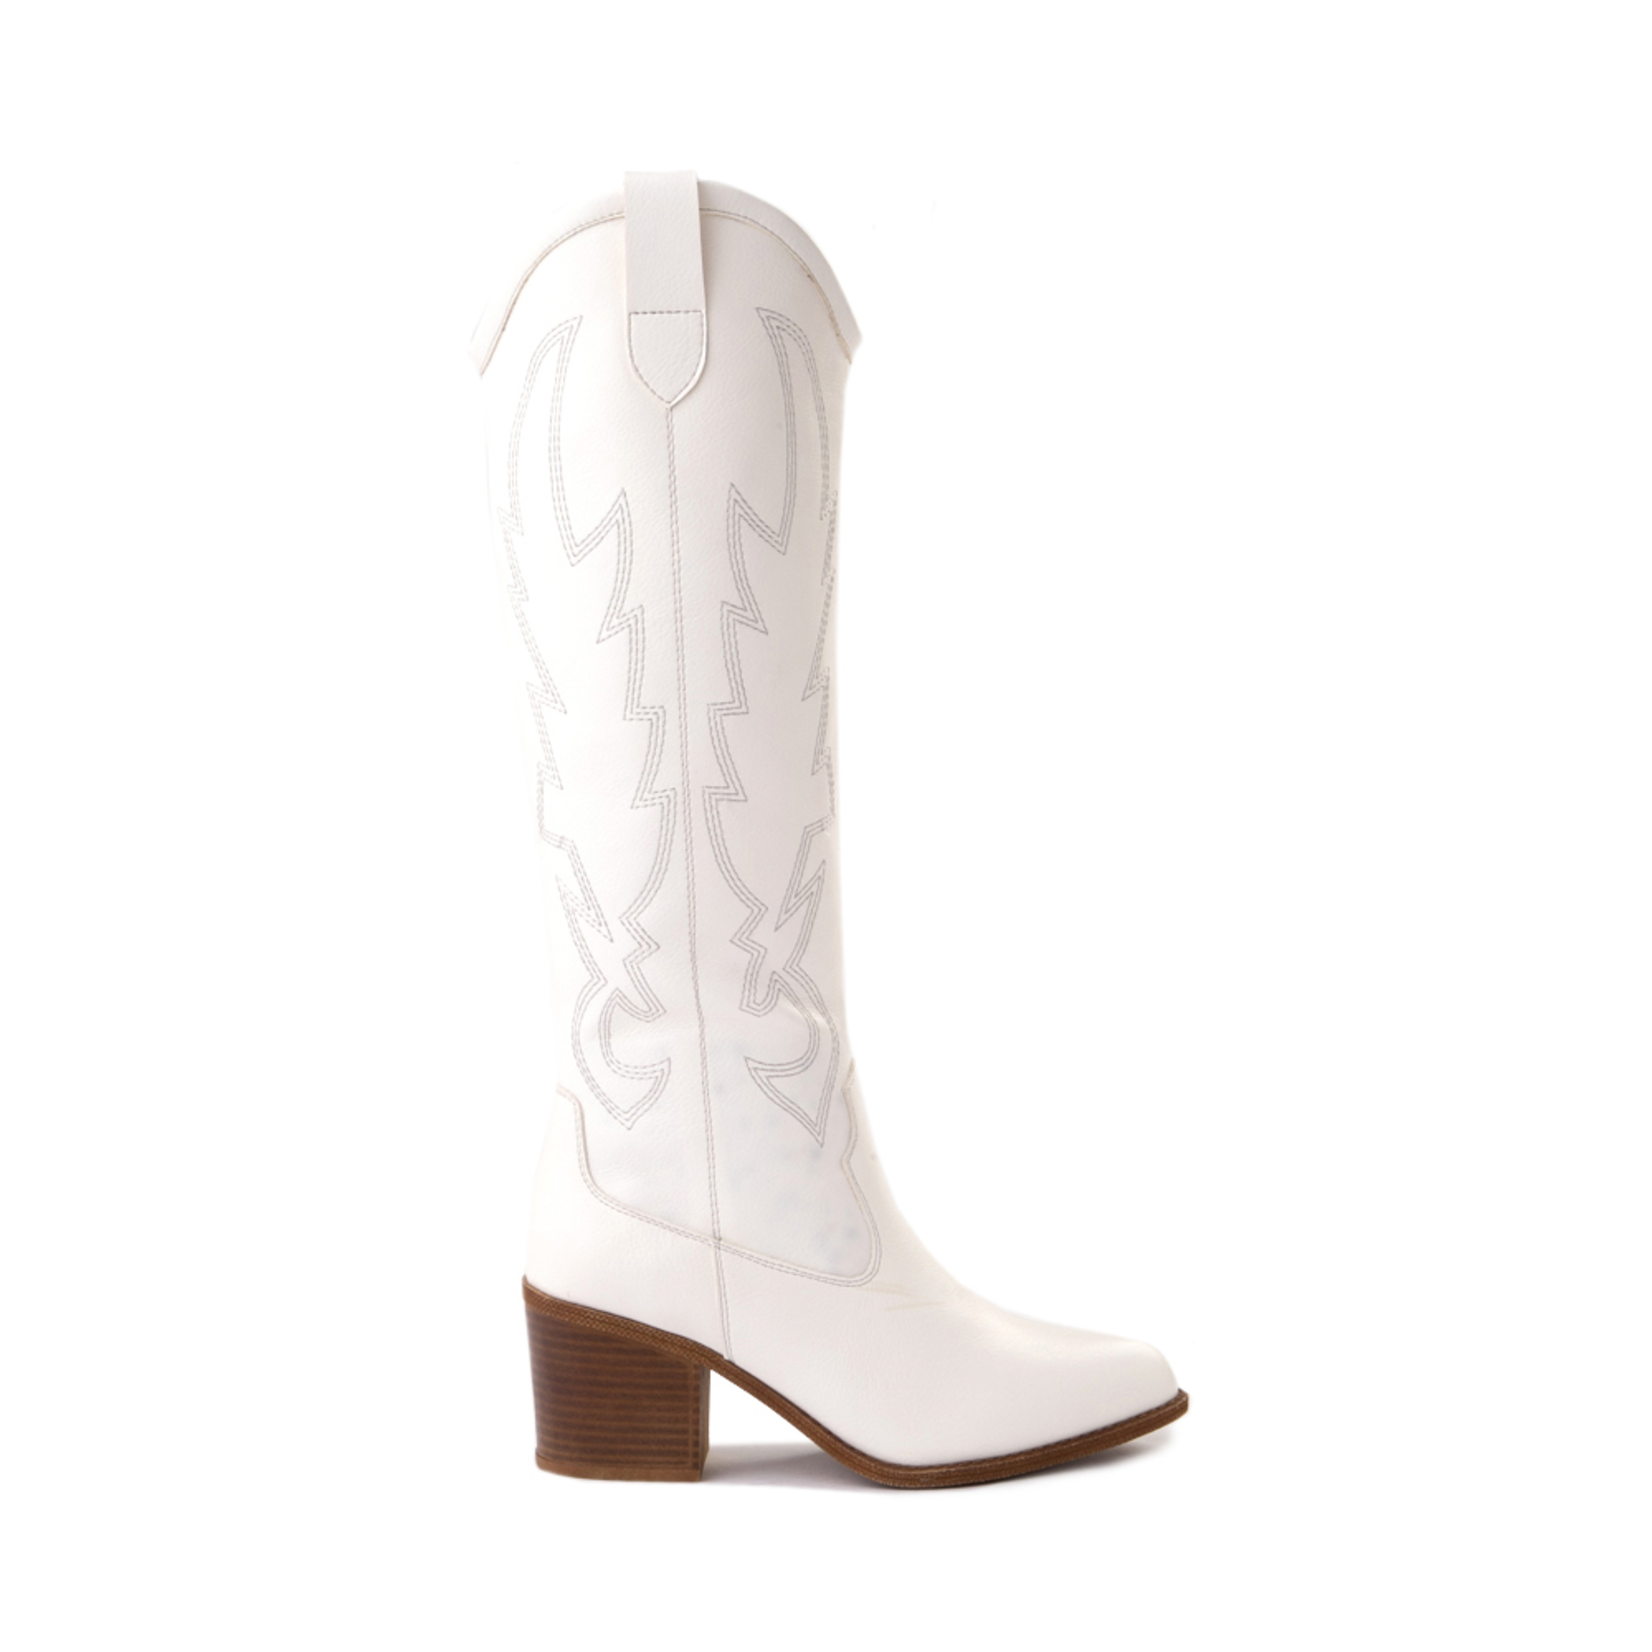 Chinese Laundry Upwind White Cowboy Boots by Dirty Laundry